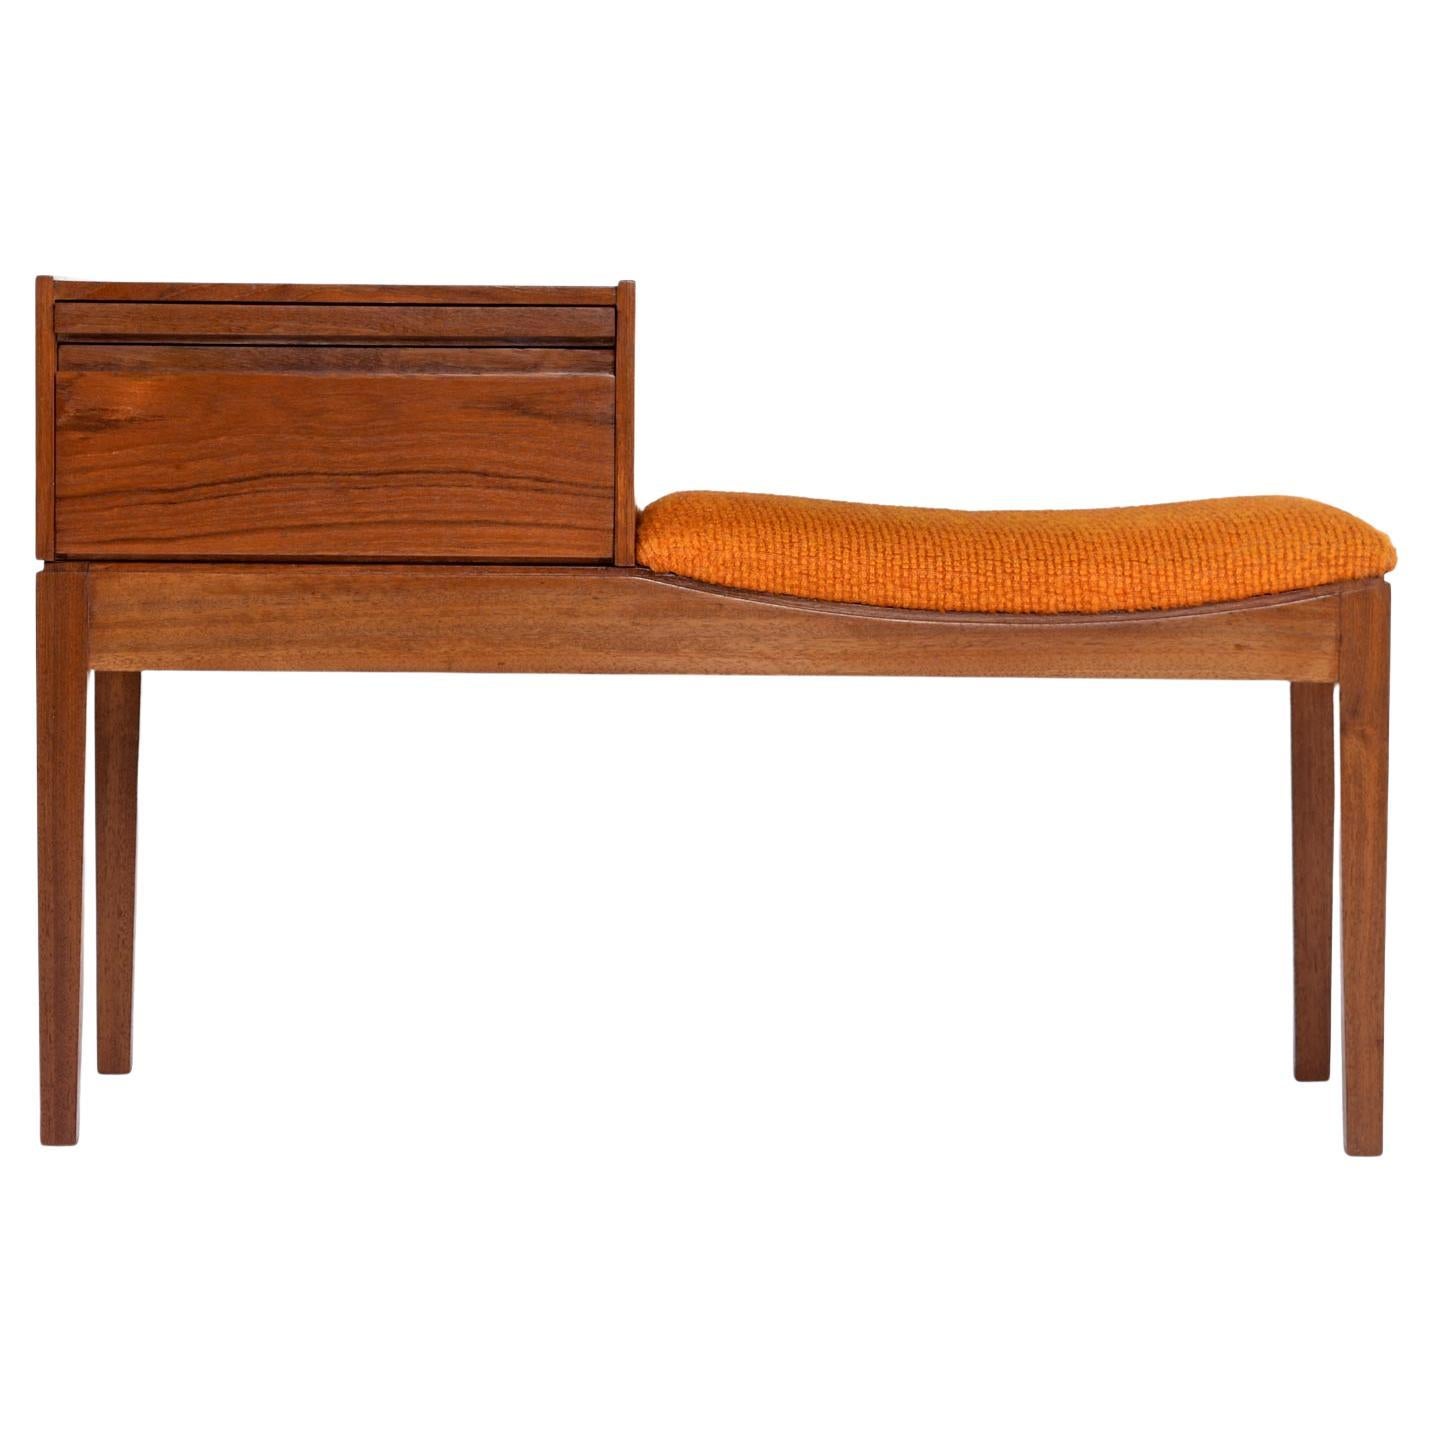 Chippy telephone seat Mid-Century Modern gossip bench, made in England. The Mid-Century Modern teak gossip bench has it's original orange fabric on the seat! Truly remarkable that the upholstery has remained in such great shape after over half a